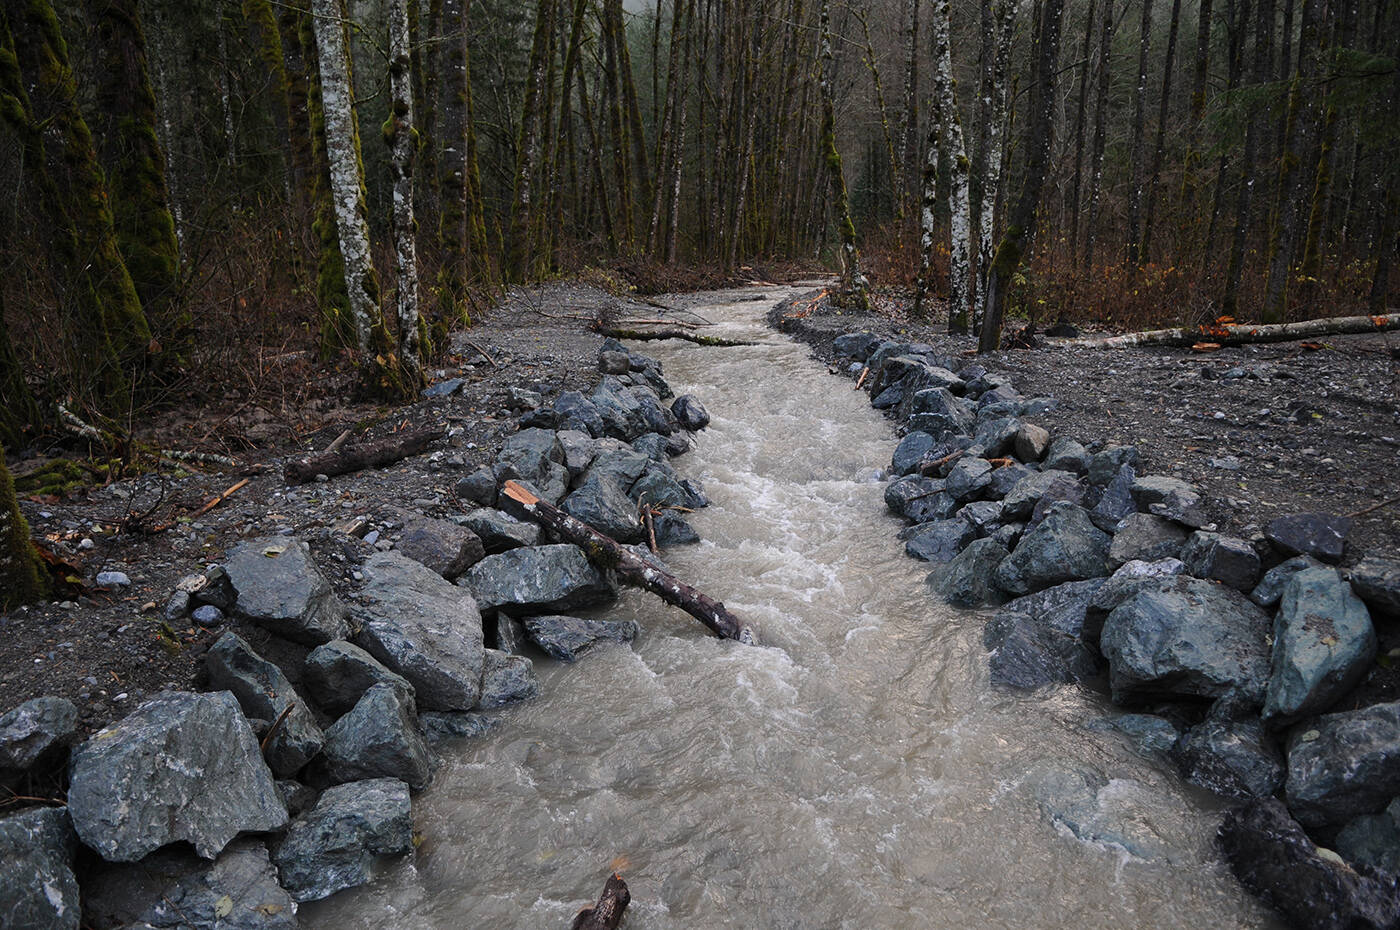 Pierce Creek flows towards Chilliwack Lake Road on Friday, Nov. 26, 2021 after this section of the channel was completely blocked with rocks and debris following heavy rain last week. (Jenna Hauck/ Chilliwack Progress)